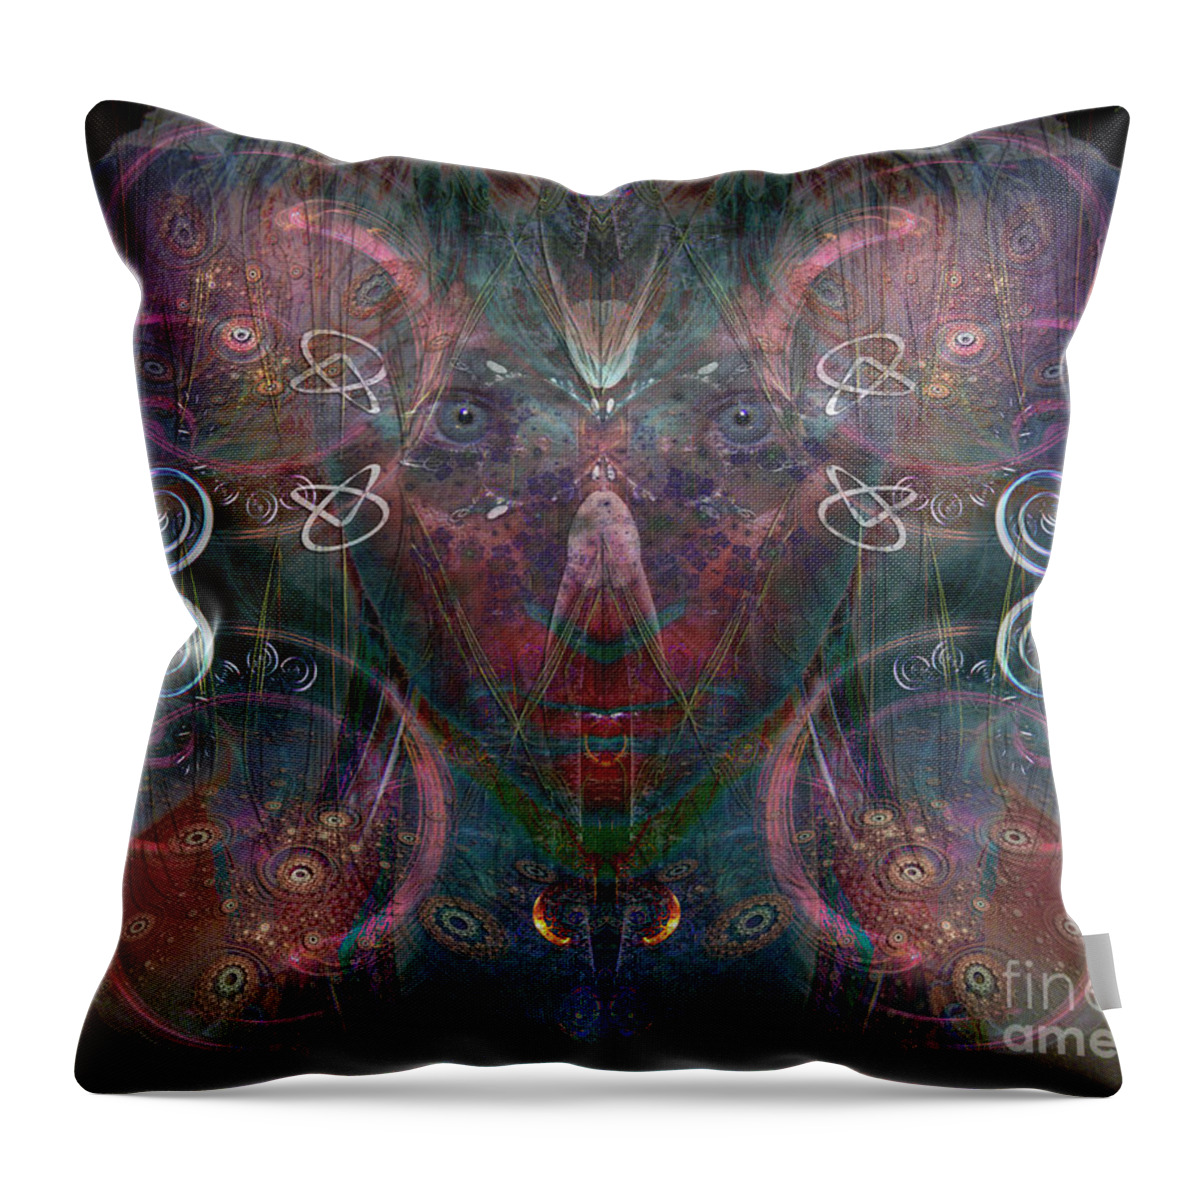 Phaeleh Falling Infinity Correlation Chaos Theory Nucleonic Particles Butterfly Effect Random Randomness Connection Throw Pillow featuring the digital art Infinite Correlation by Rhonda Strickland